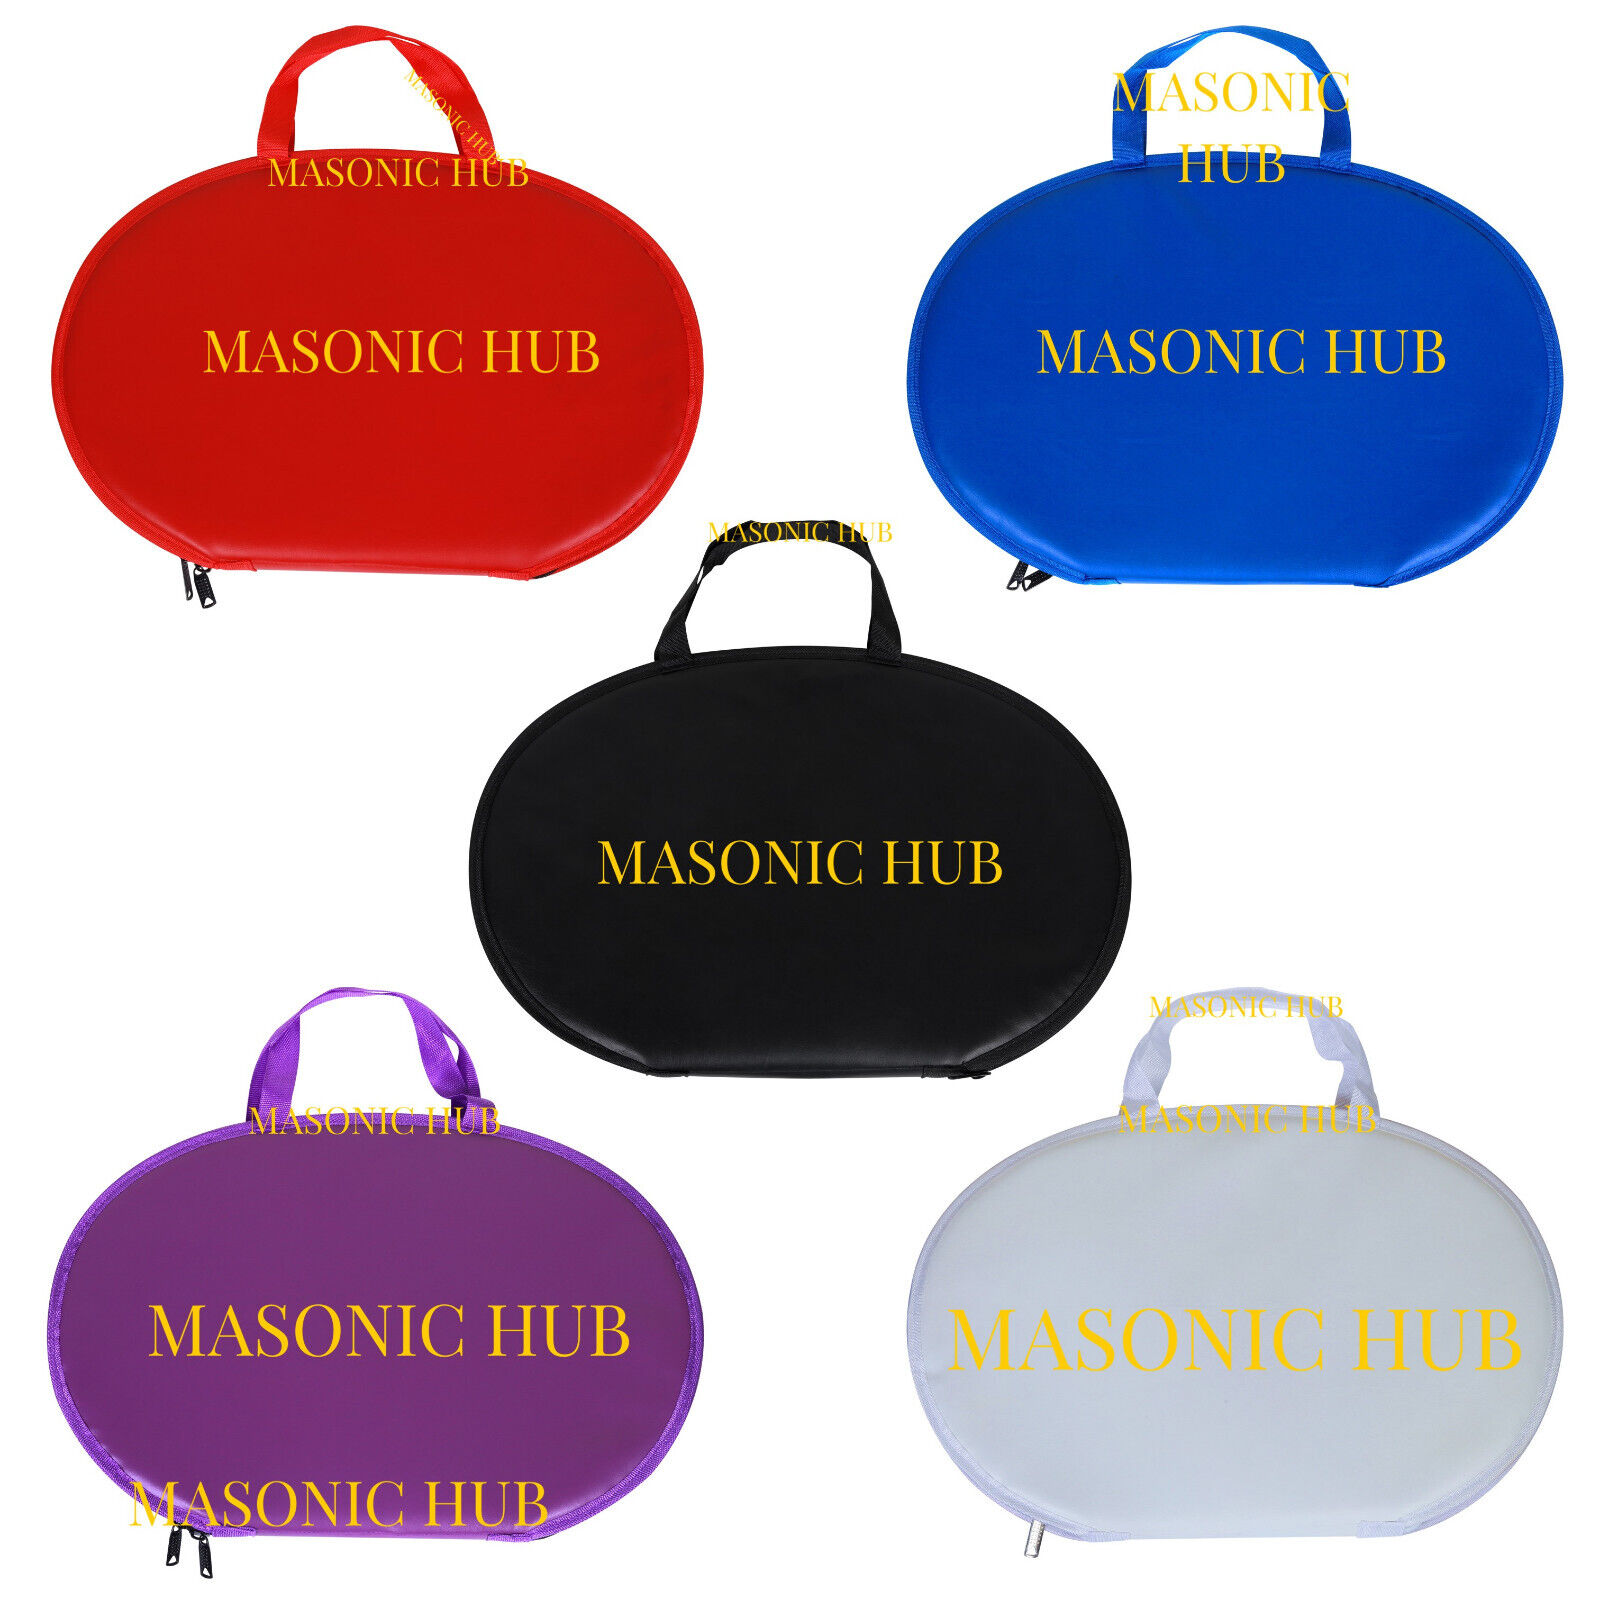 Masonic Regalia Chain Collar Case With Soft Padded Lining - 5 COLORS SELECTION